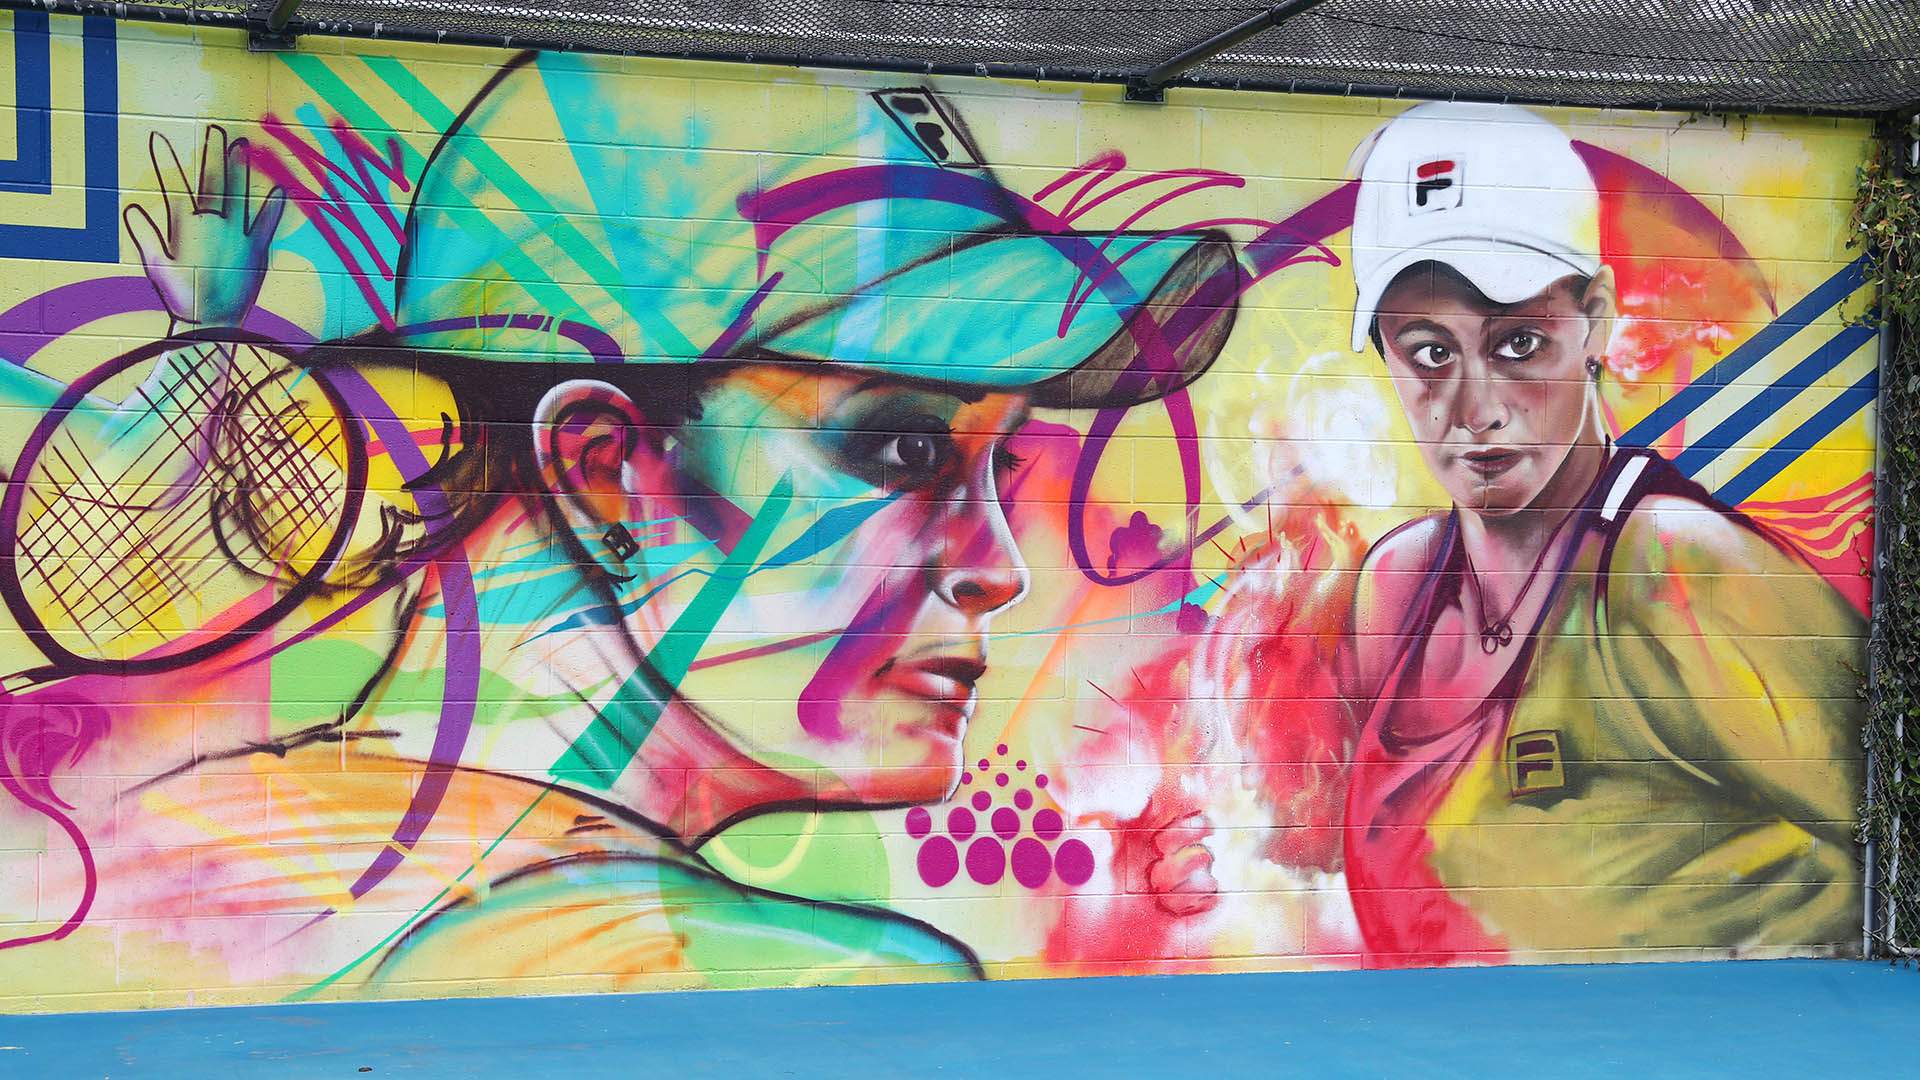 You Can Pay Your Respects to Retiring Tennis Champ Ash Barty at These Two Brisbane Murals